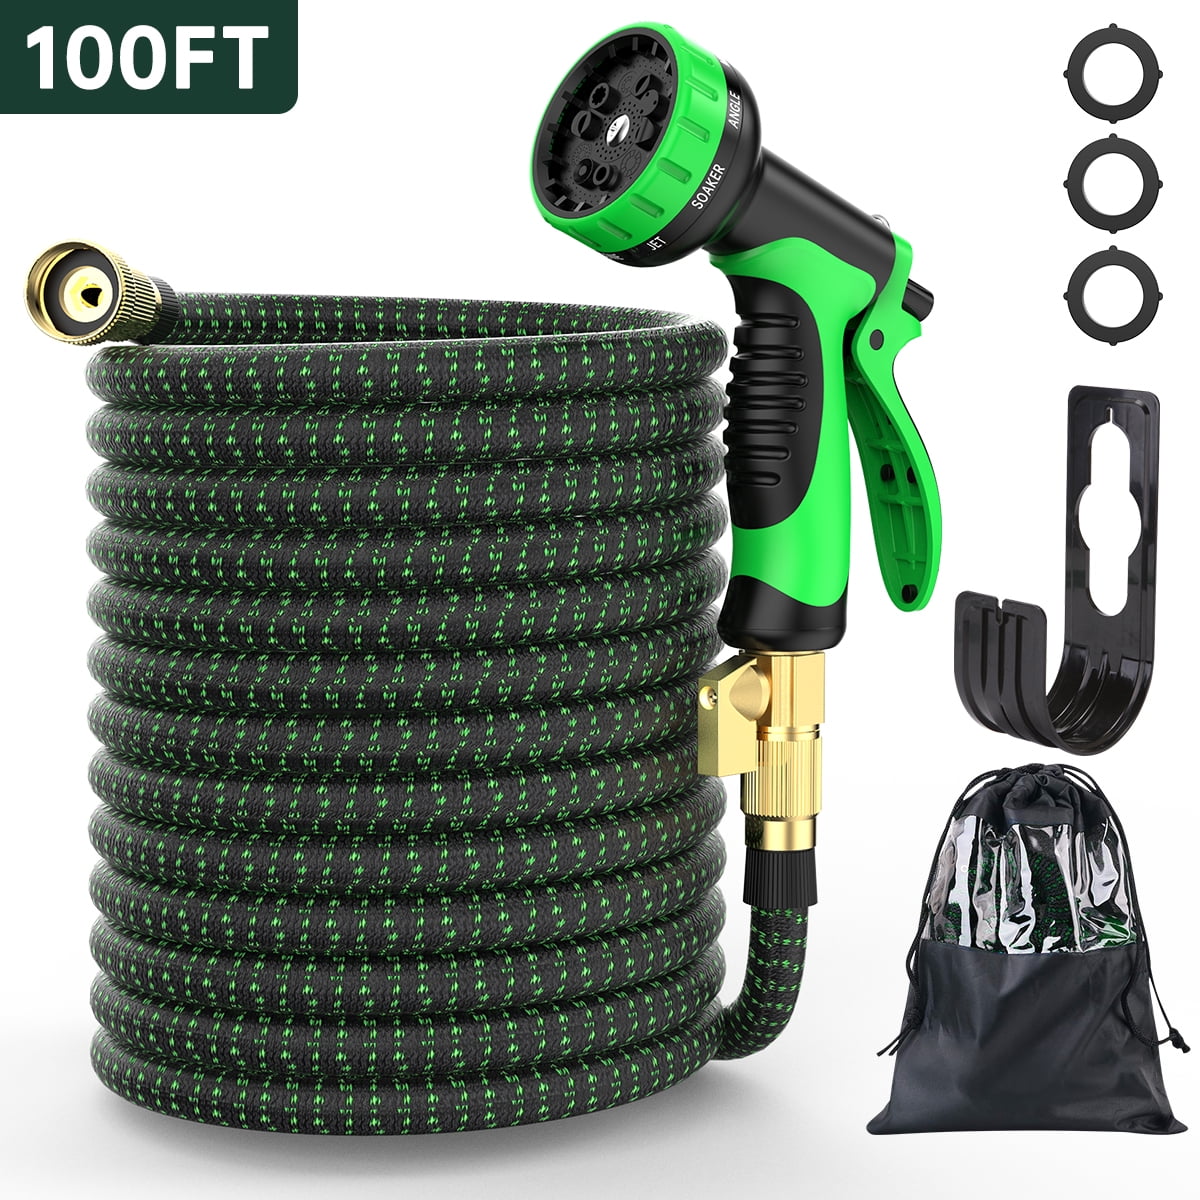 Details about   25-200FT Expanding Flexible Expandable Garden Water Hose Pipe Spray Nozzle NEW 